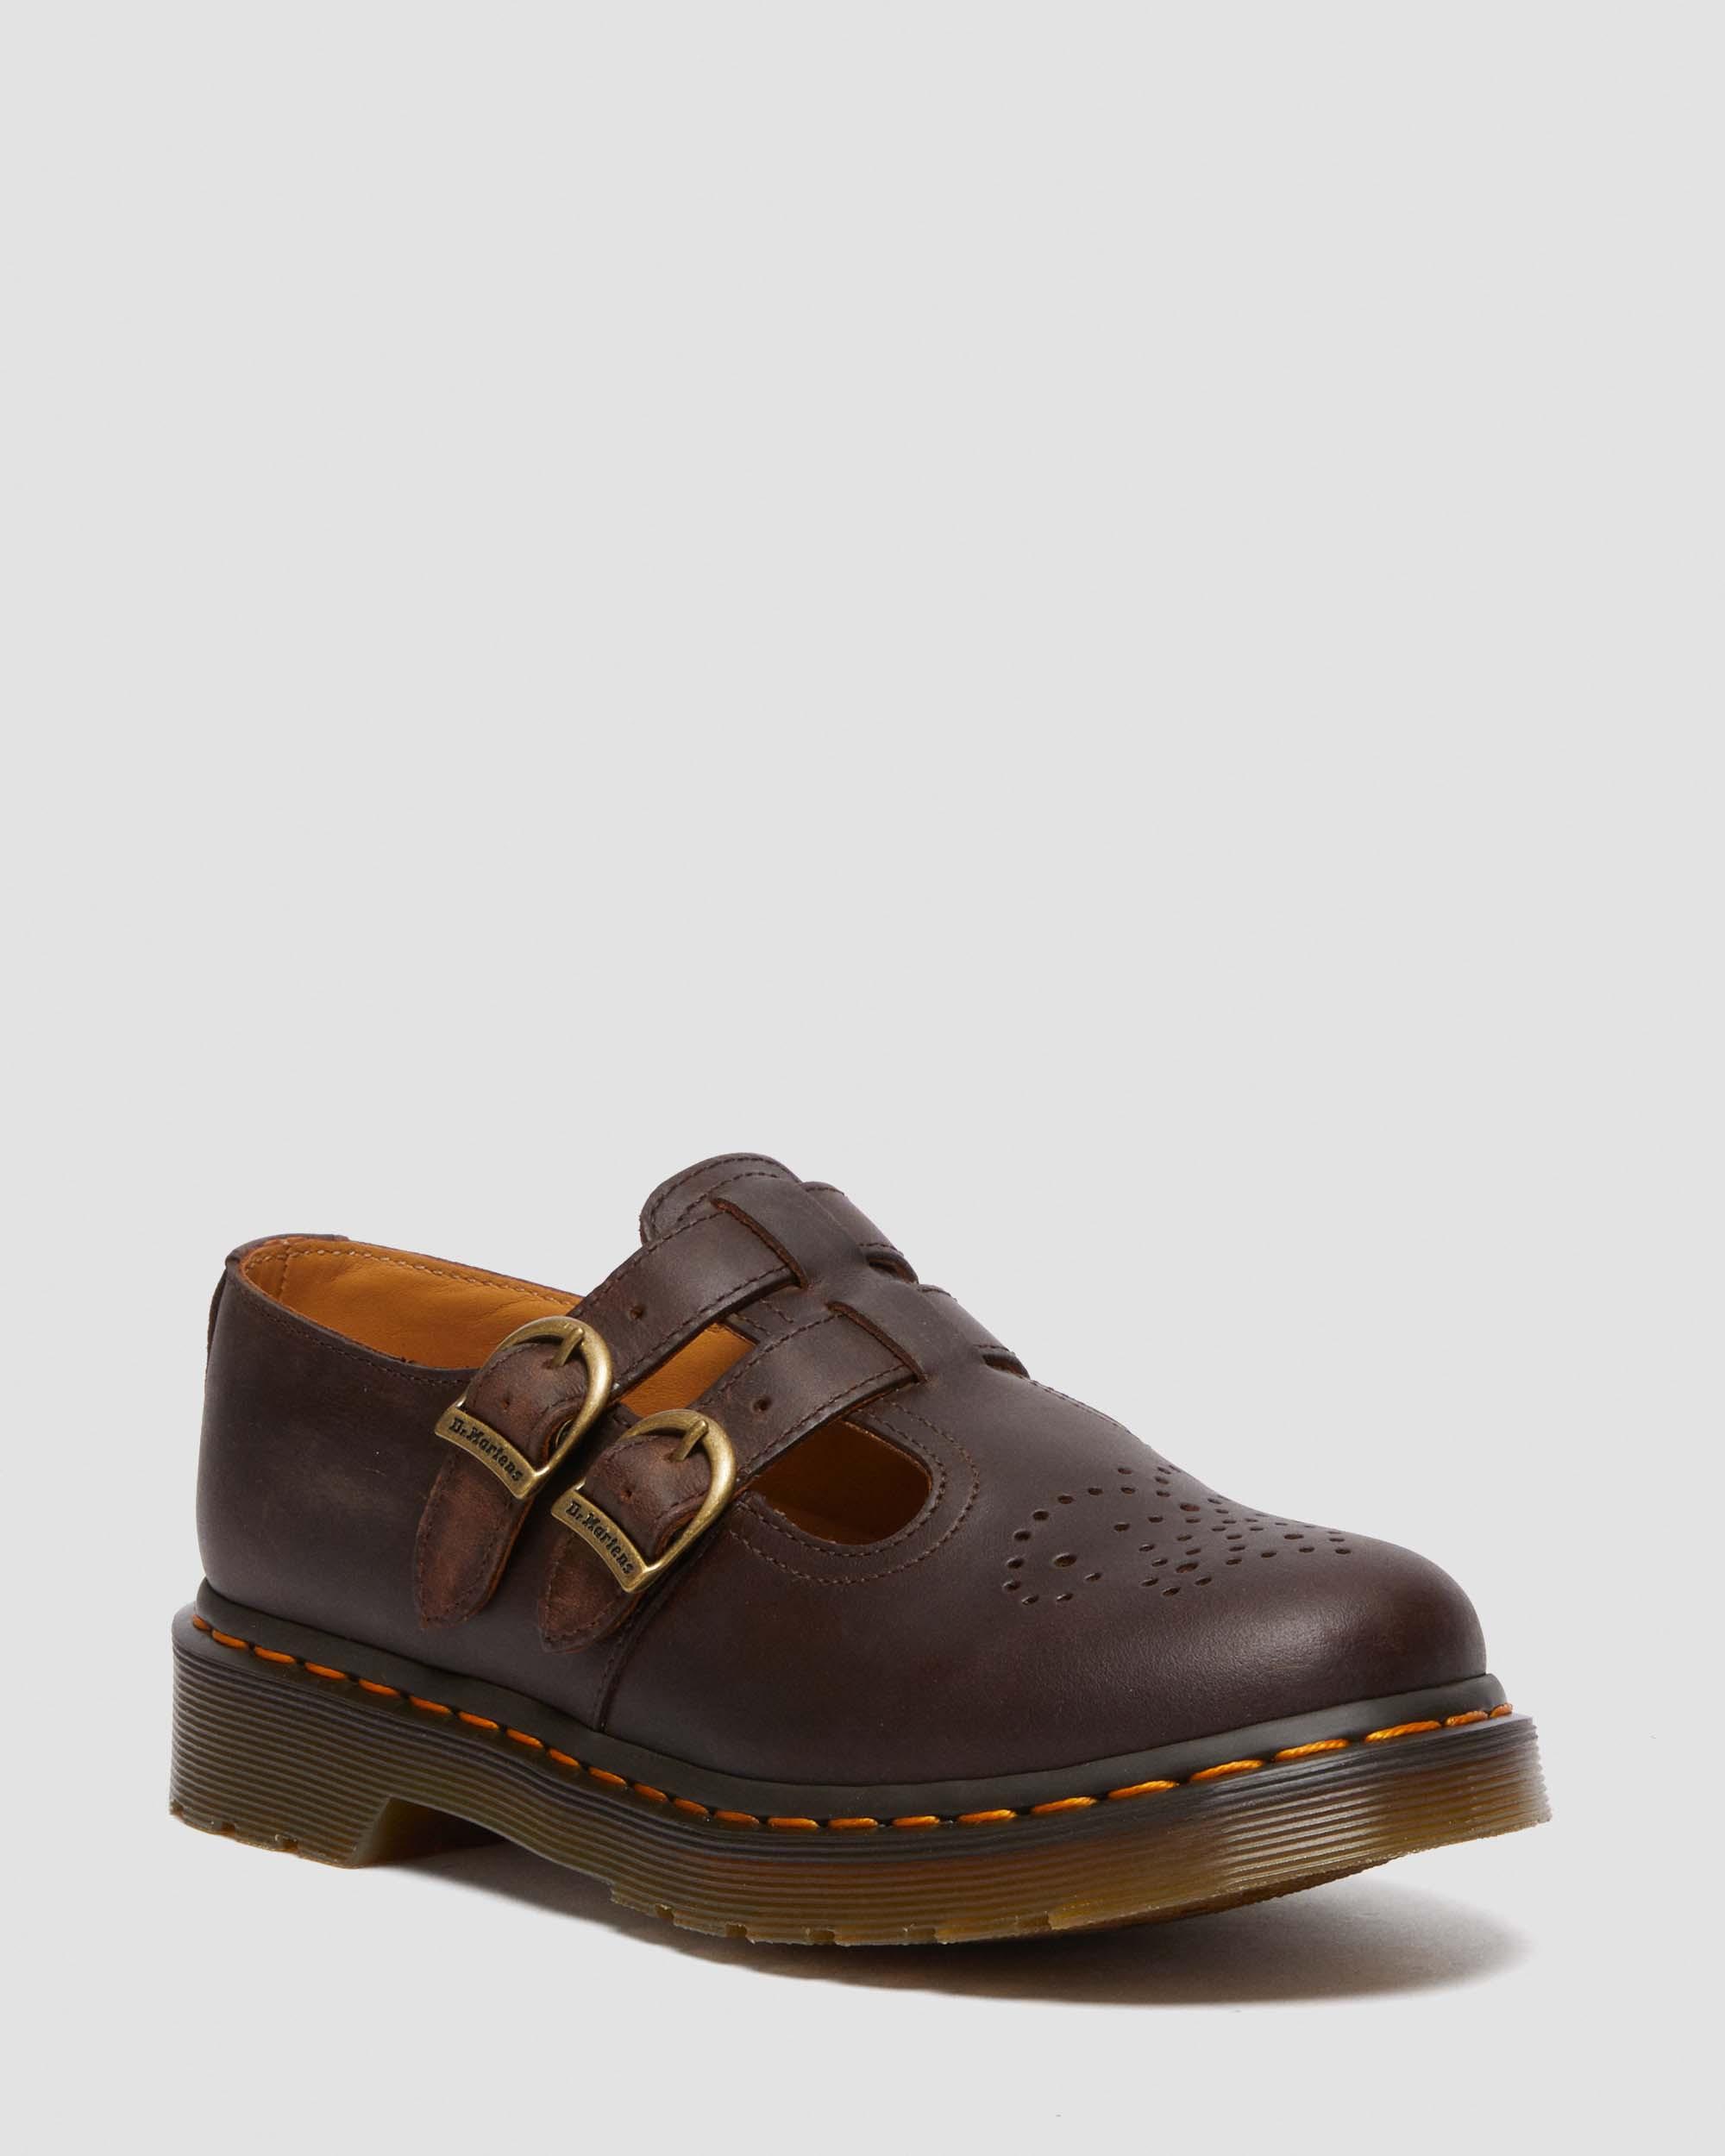 DR MARTENS 8065 Crazy Horse Leather Mary Jane Shoes - Wishupon